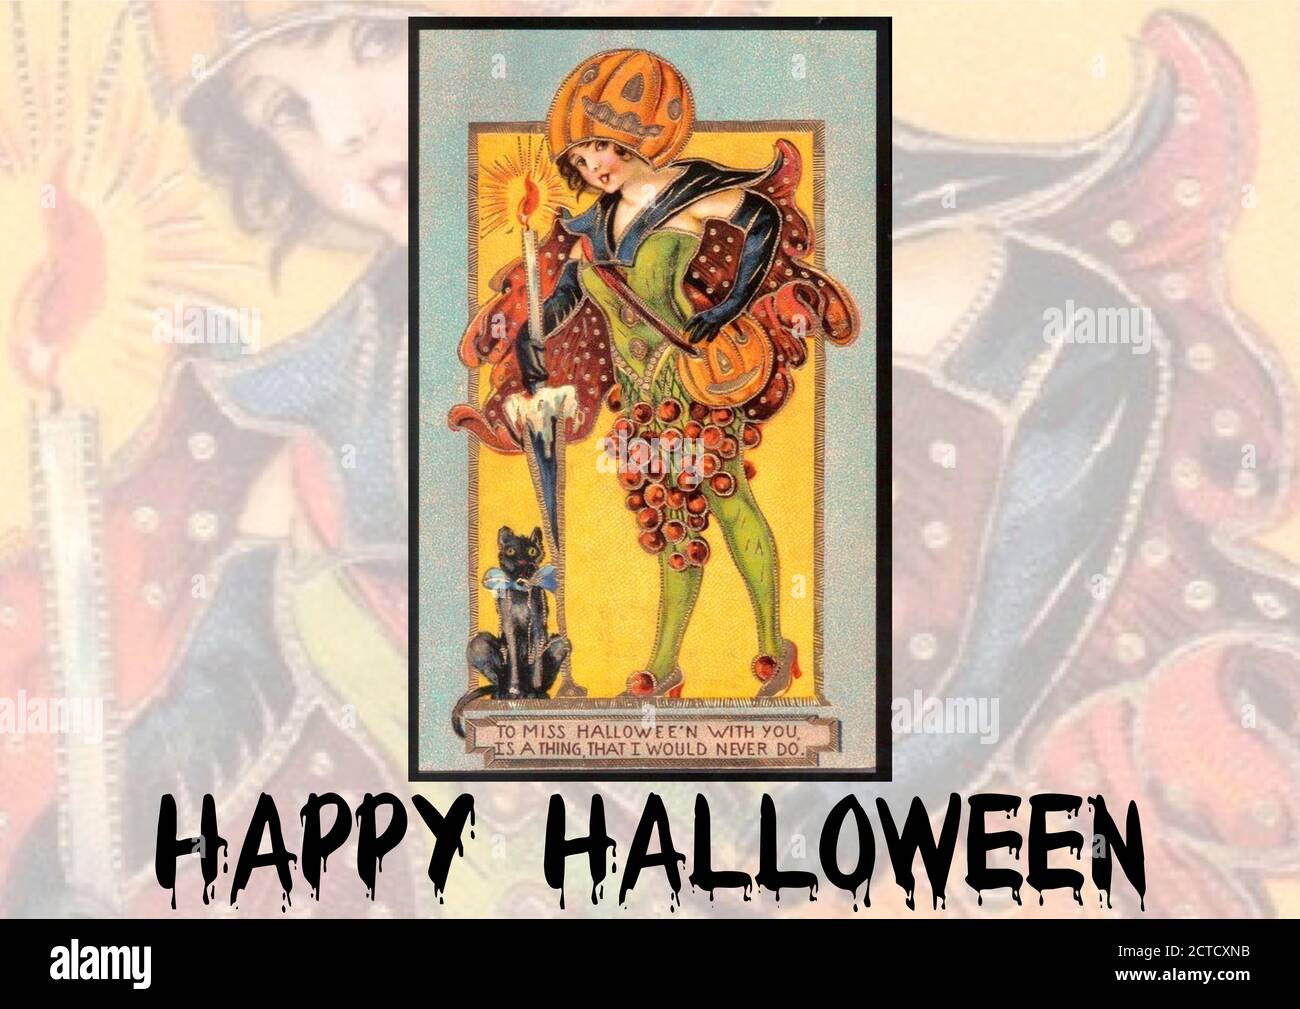 Vintage Happy Halloween greetings with copy space either side to add text/message of love. To miss Halloween with you is a thing I would never do xxxx Stock Photo